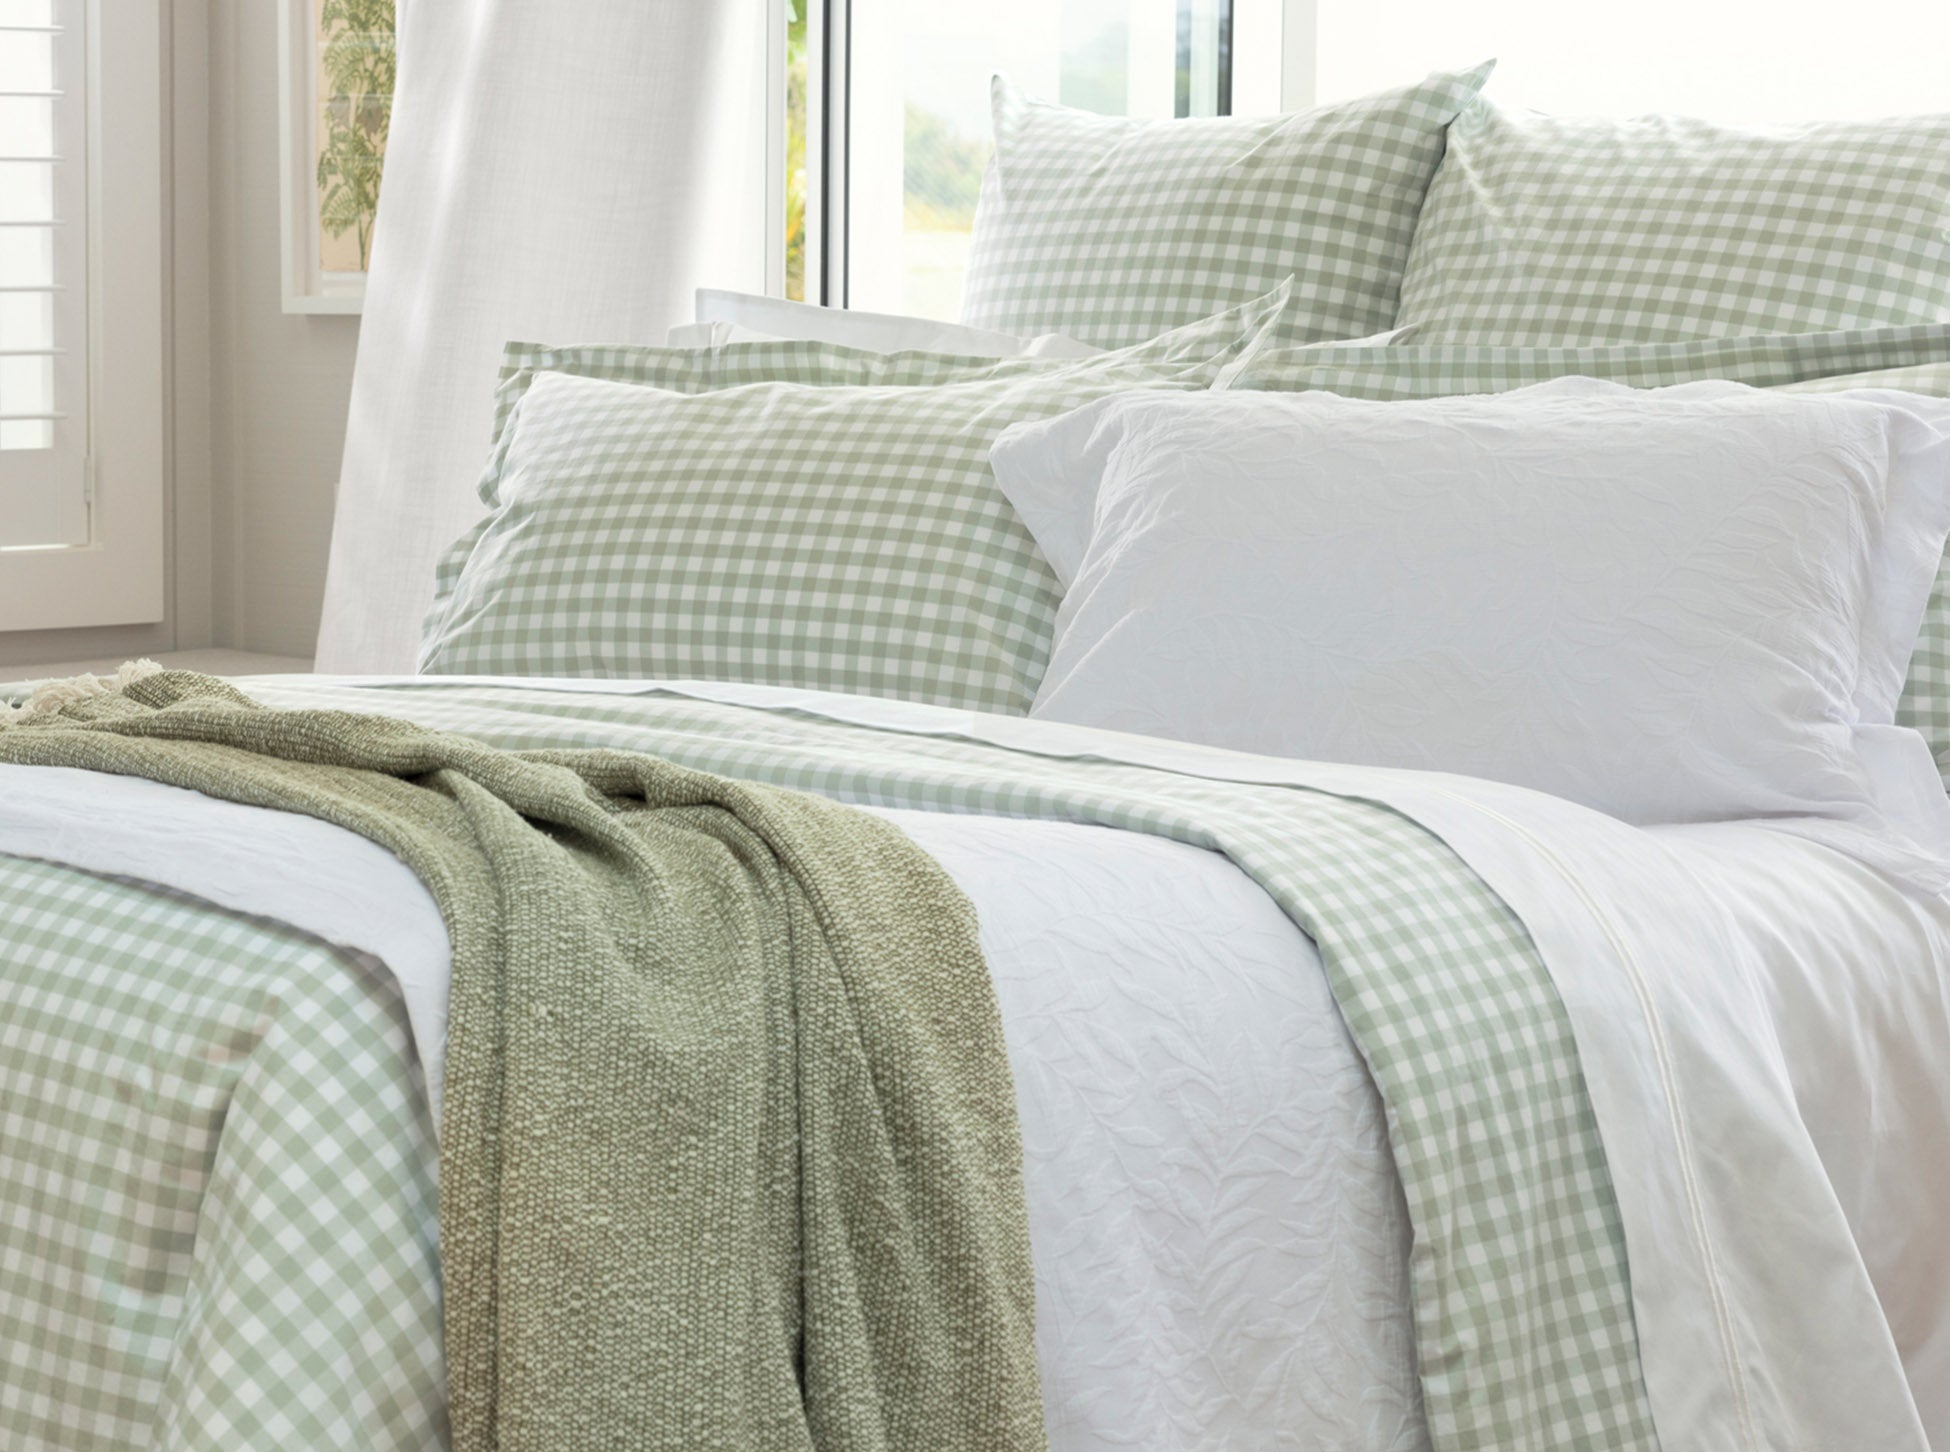 Bed Linen designed for your home